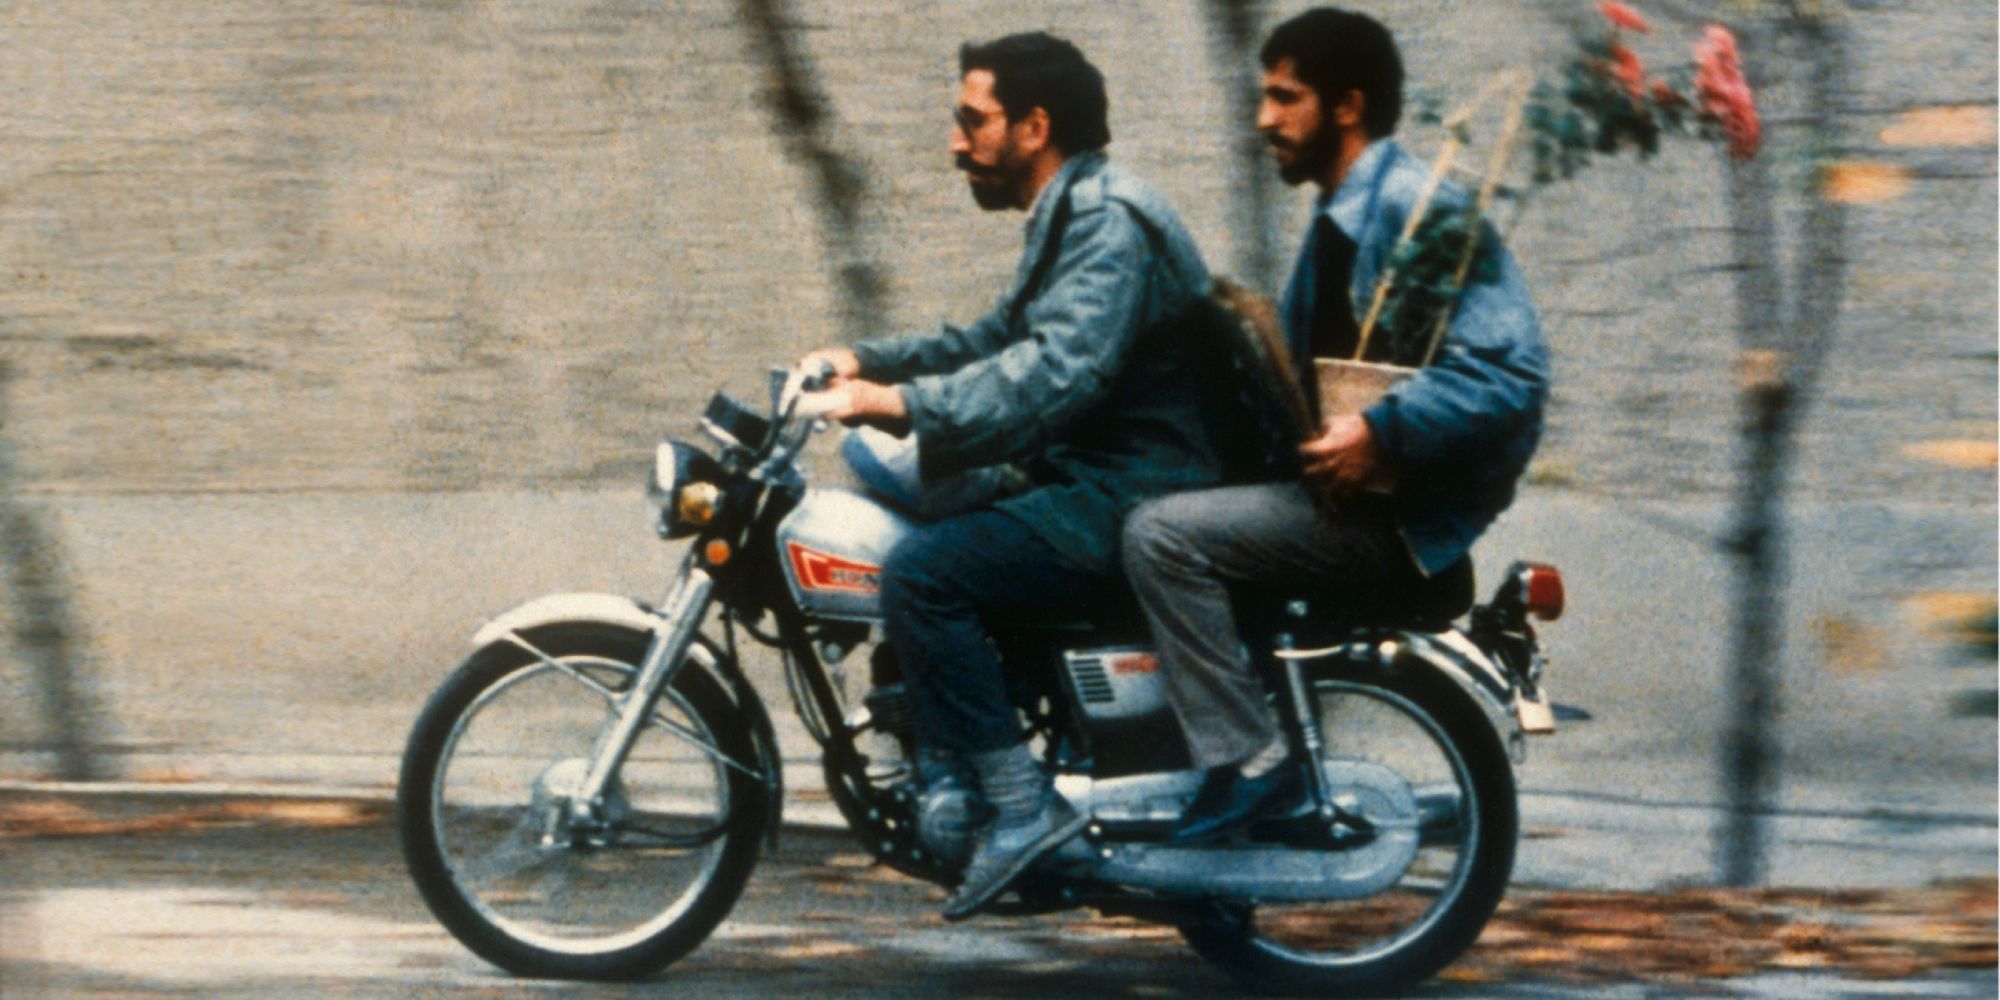 Mohsen Makhmalbaf and Hossain Sabzian as Mohsen and Hossain, riding a motorcycle in Close-Up